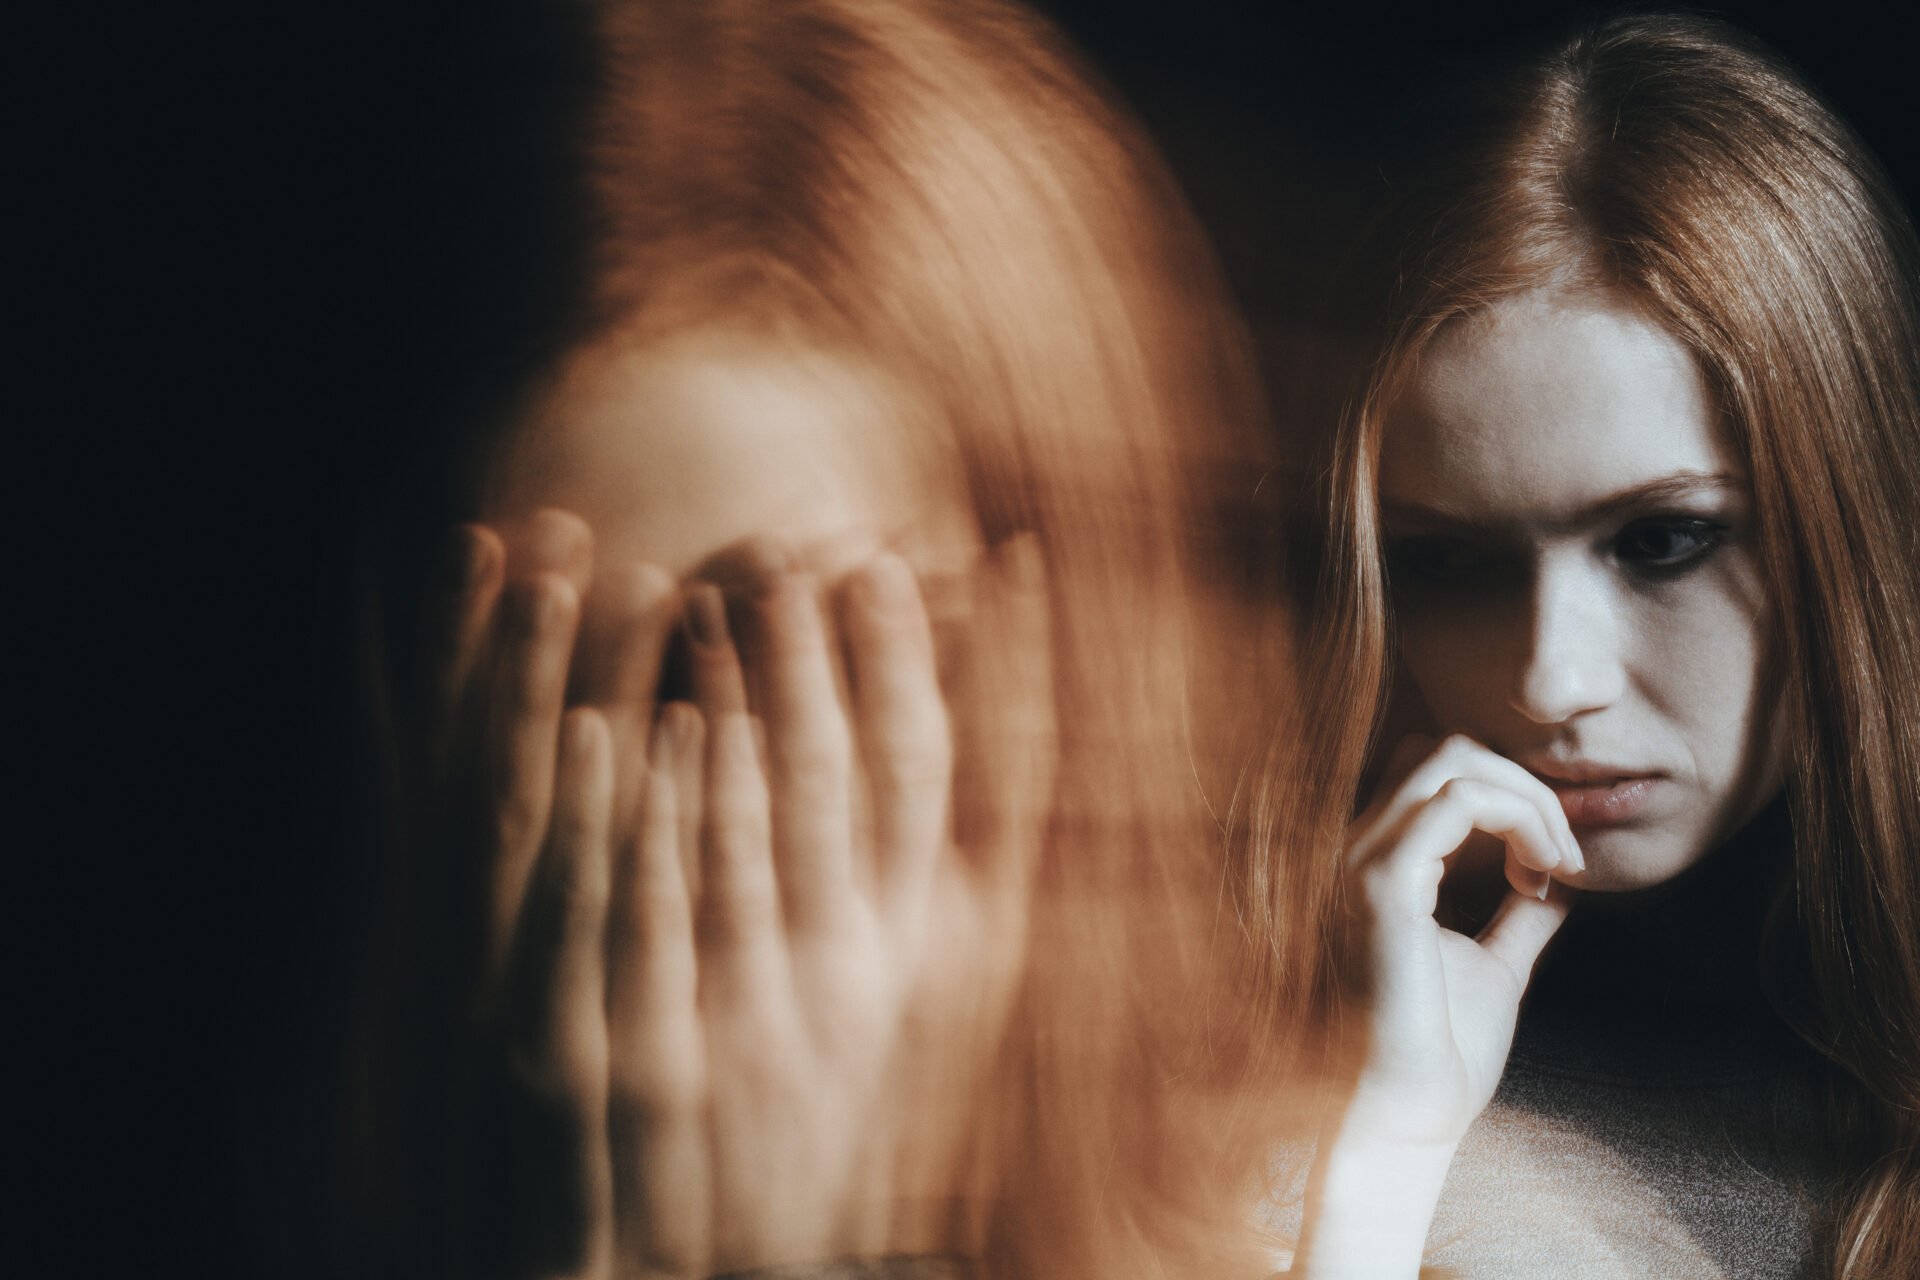 Close-up of a blurred face of a young girl with split personality disorder against black background